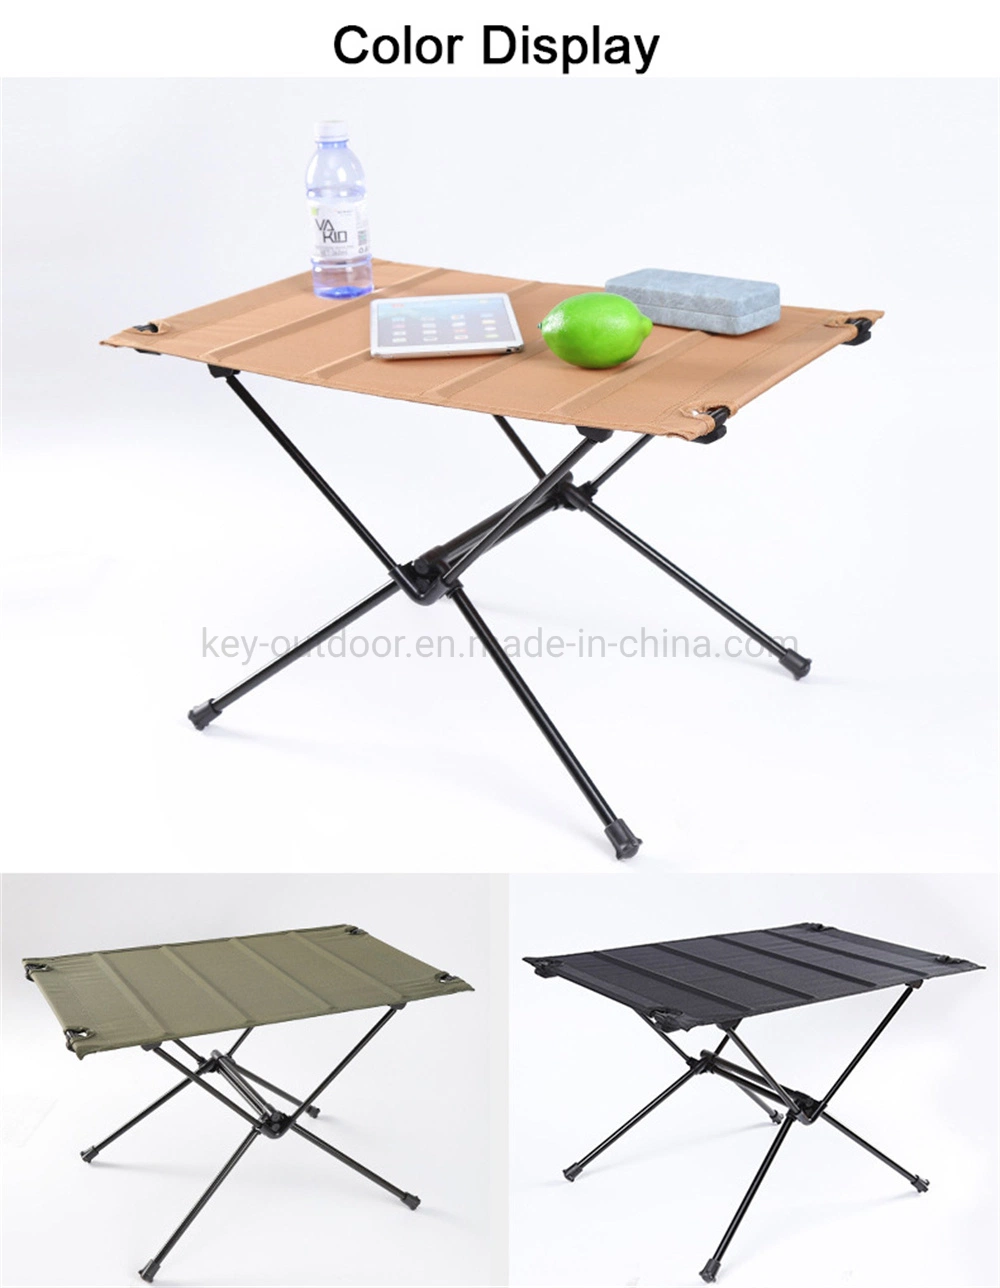 Outdoor Tables Metal High Bar Camping Foldable Portable Side Picnic Beach Desk BBQ Picnic Furniture Coffee Folding Dining Set Outdoor Table